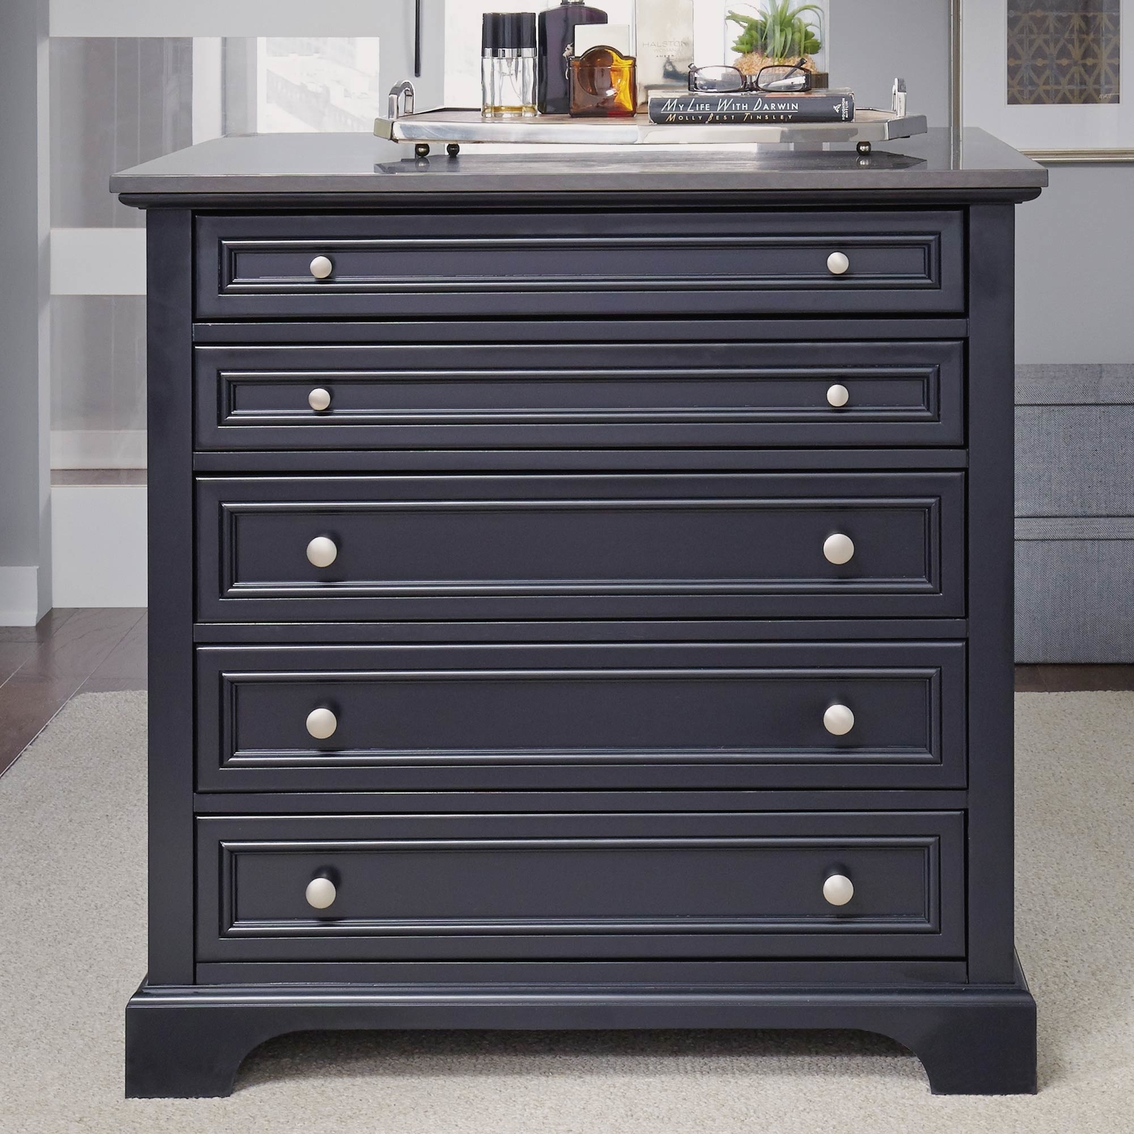 Home Styles Bedford Closet Island Dressers Home Appliances